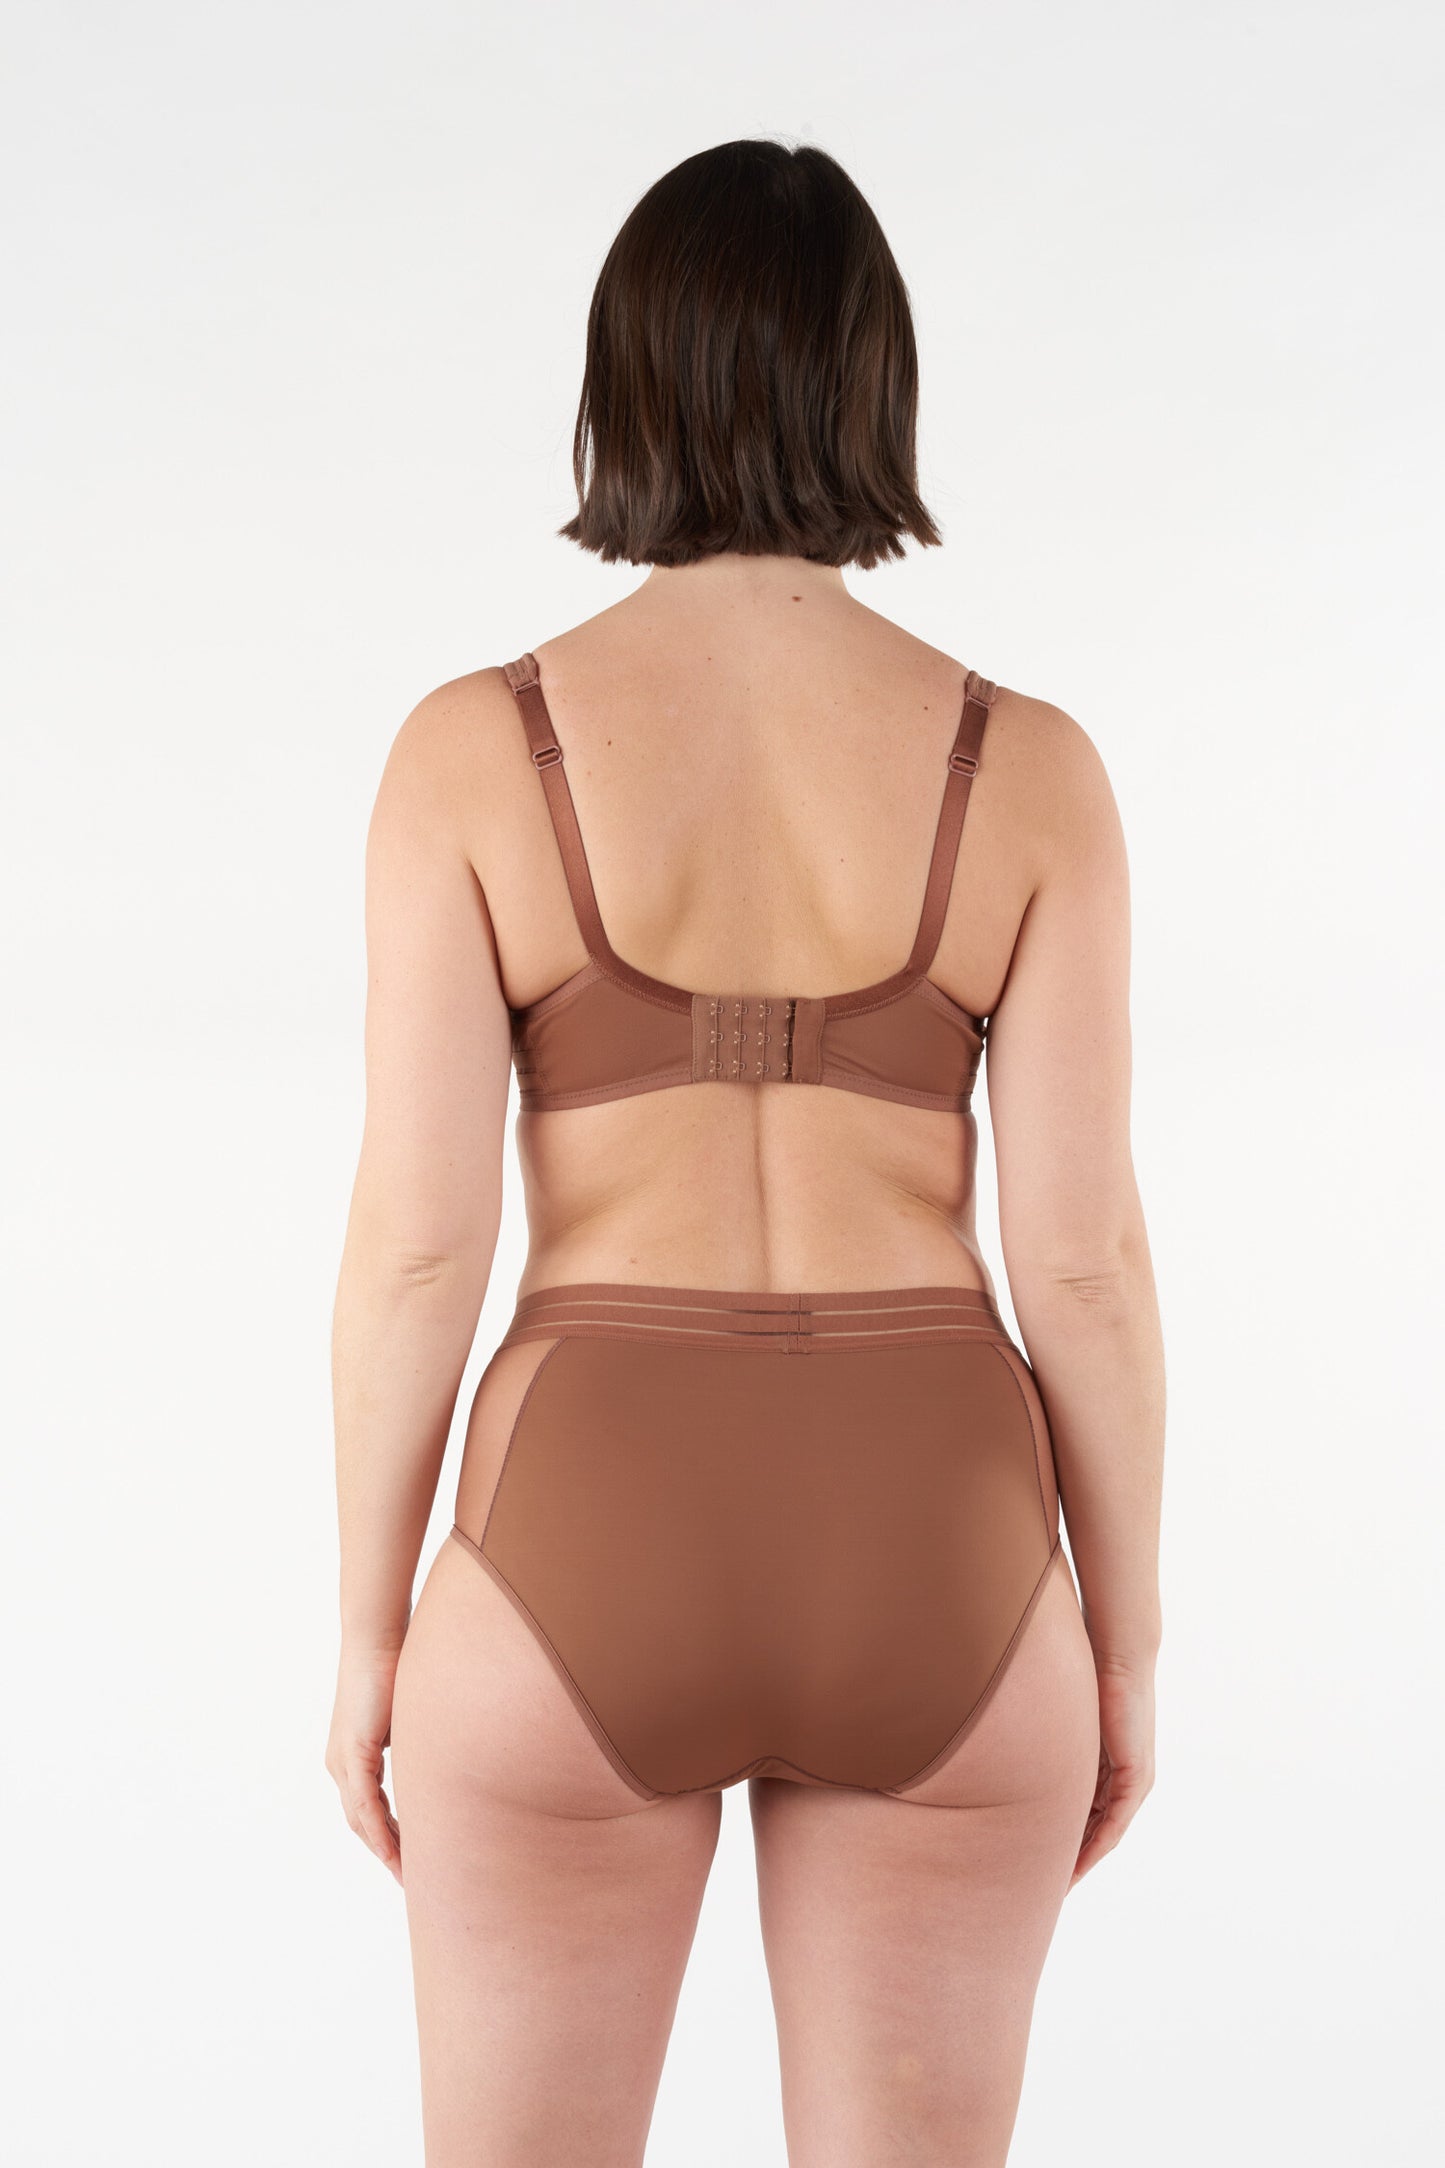 Maison Lejaby: Nufit High-Waisted Brief - Cocoa